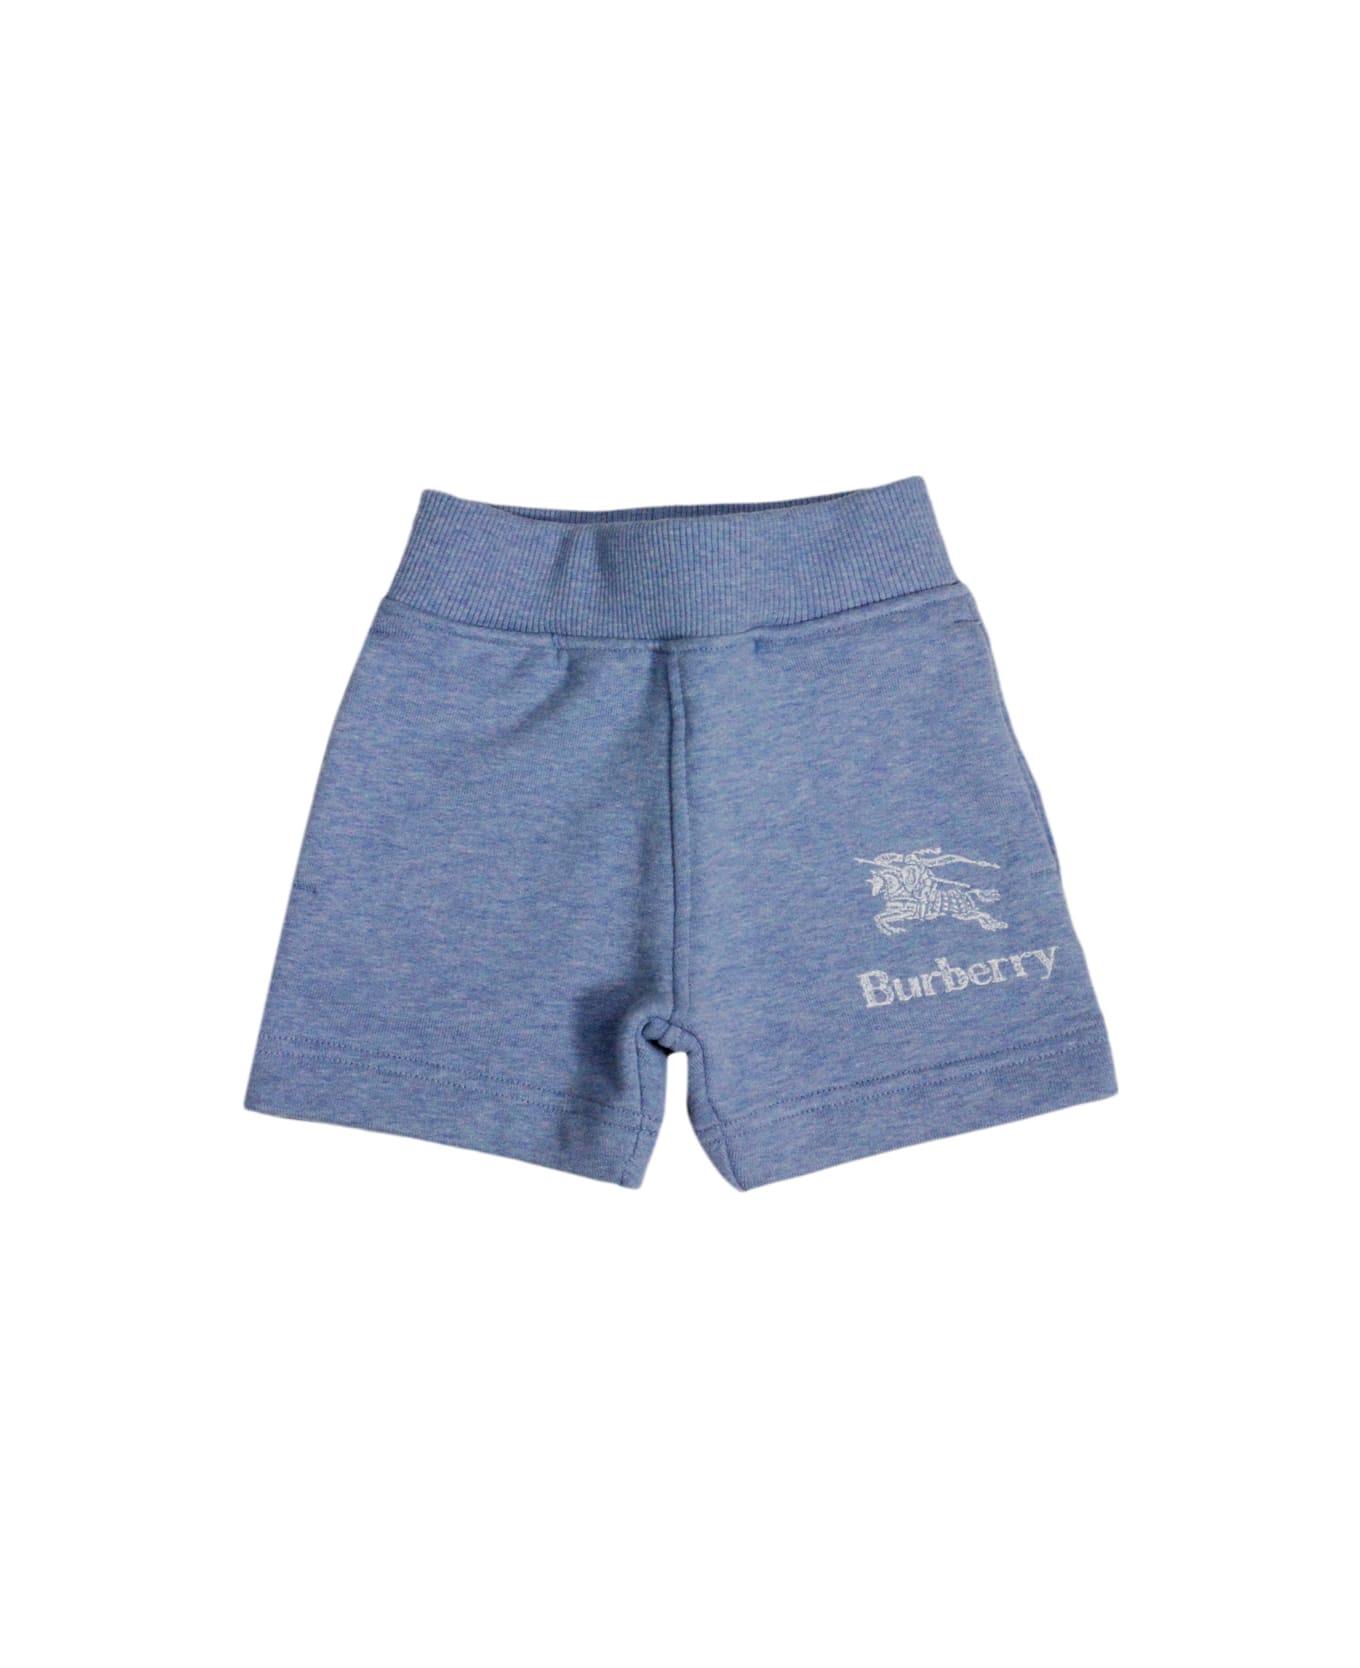 Burberry Cotton Fleece Bermuda Shorts With Elasticated Waist And Welt Pockets With Logo On The Front - Light Blu